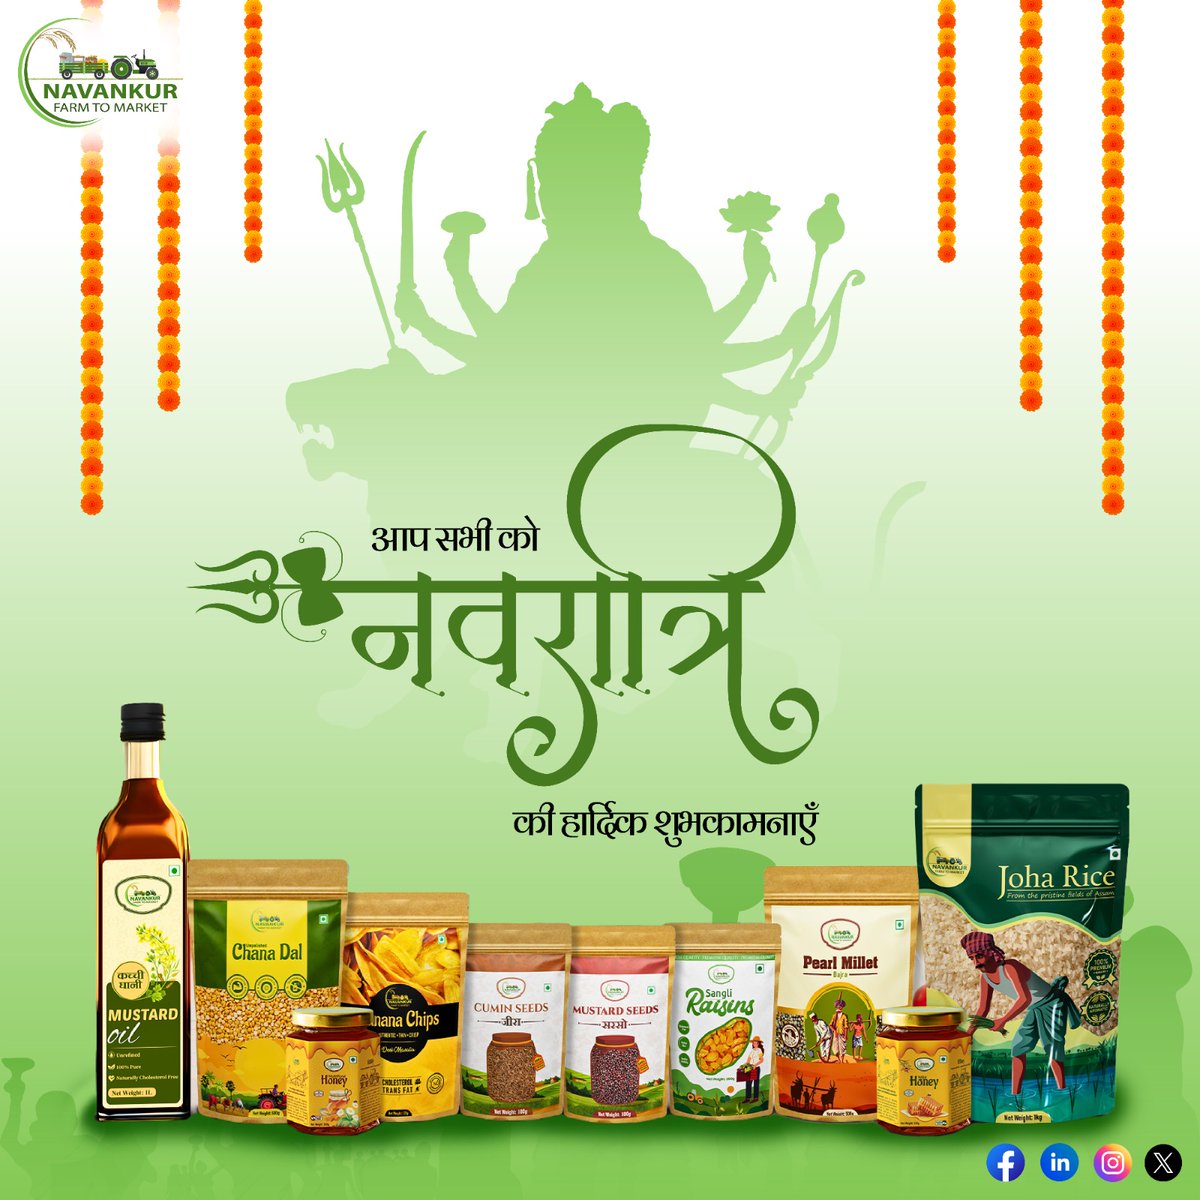 Welcome the auspicious occasion of चैत्र नवरात्रि  with Navankur, where tradition meets agriculture! and Embrace the nine-day celebration with our bountiful agricultural products. #ChaitraNavratri #Navankur #Navratri #DivineCelebration #FestiveSpirit